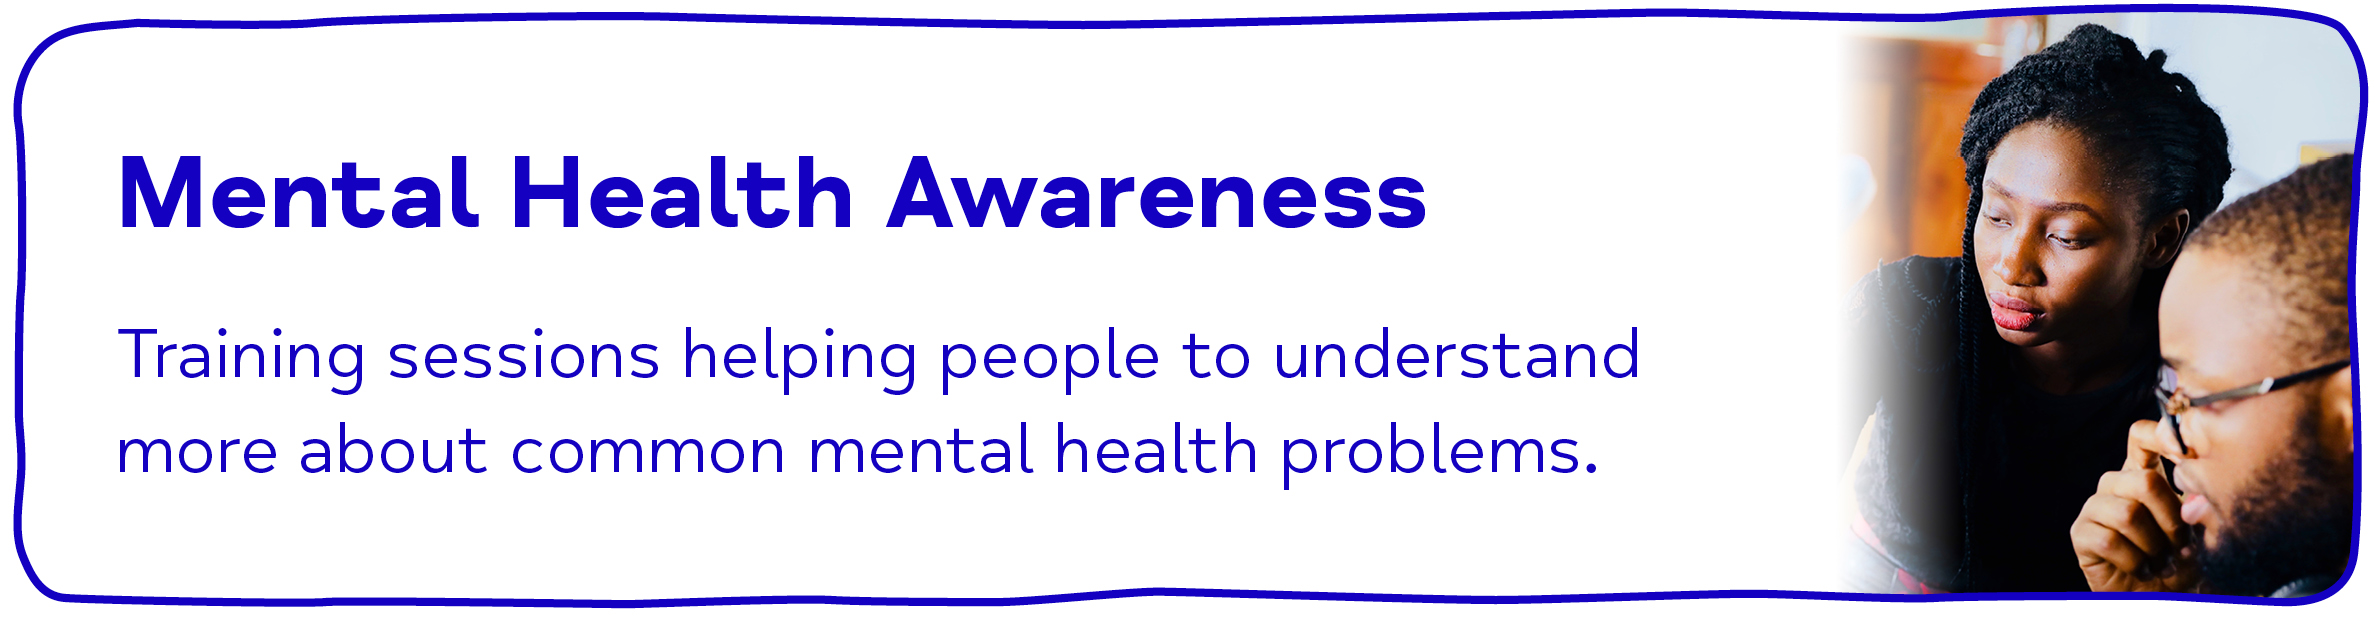 Mental Health Awareness Training sessions helping people to understand more about common mental health problems.